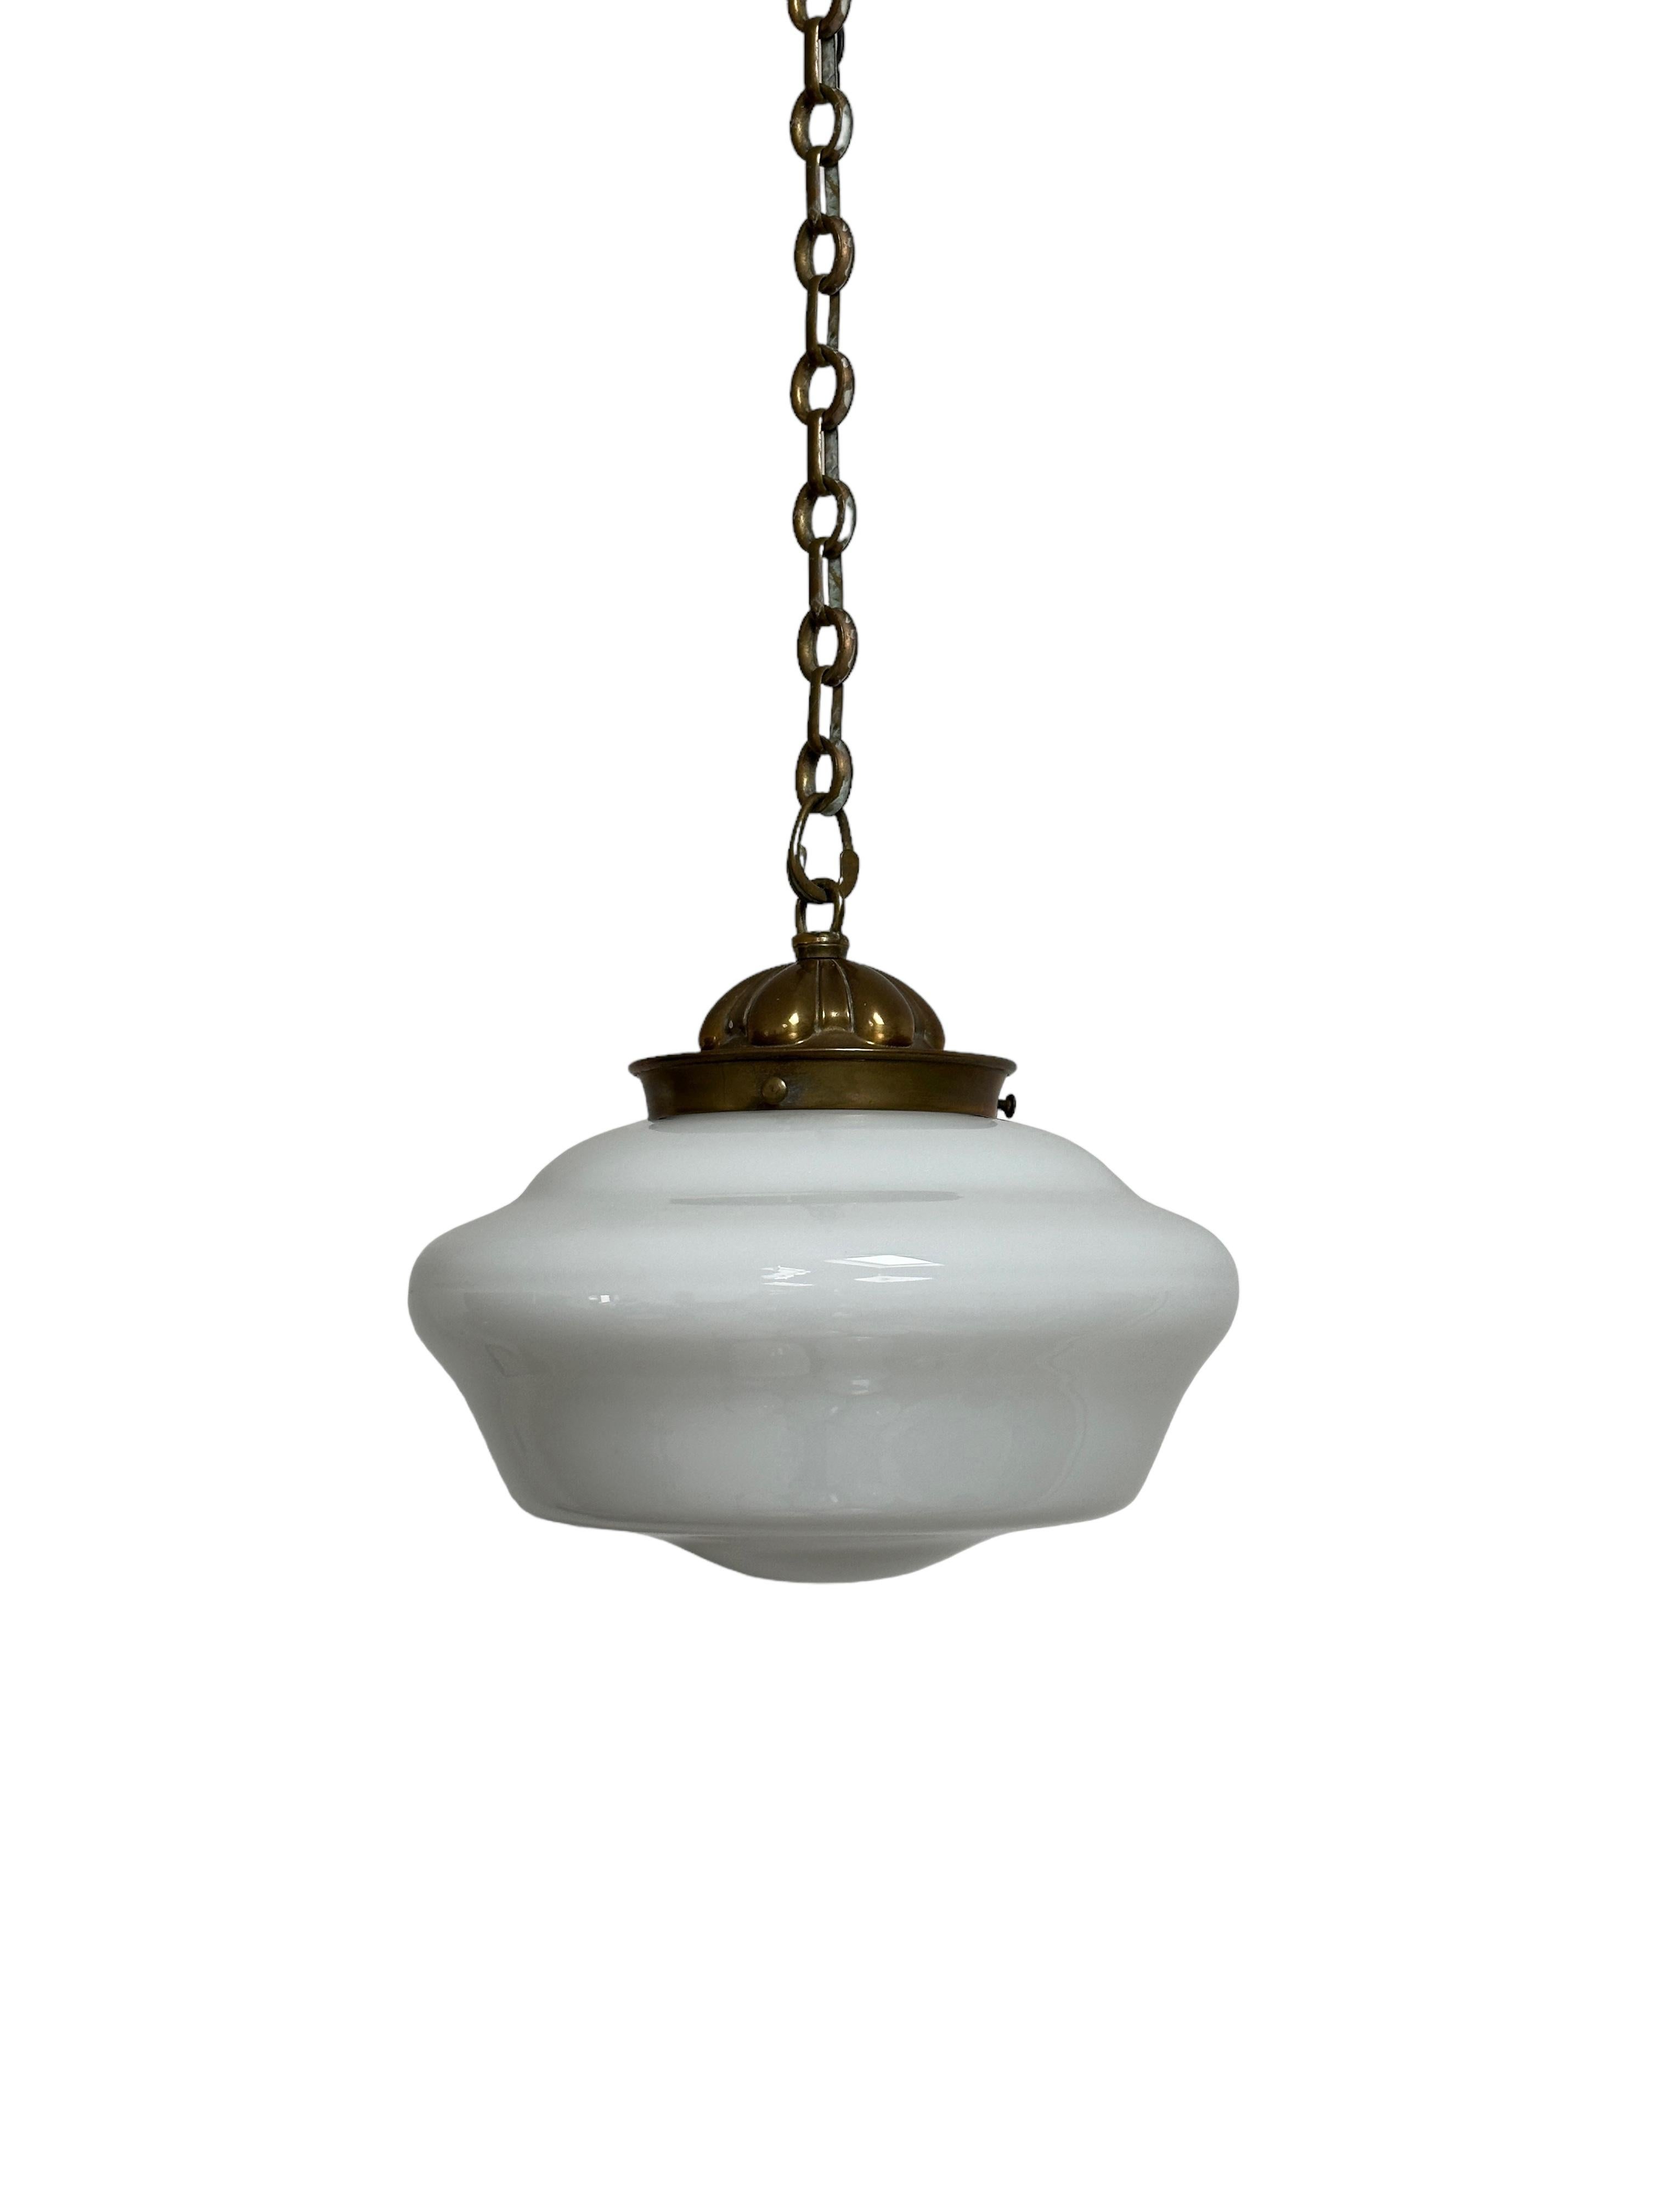 Run Set Antique Vintage Opaline Milk White Glass Ceiling Pendants Light Lamp In Good Condition For Sale In Sale, GB